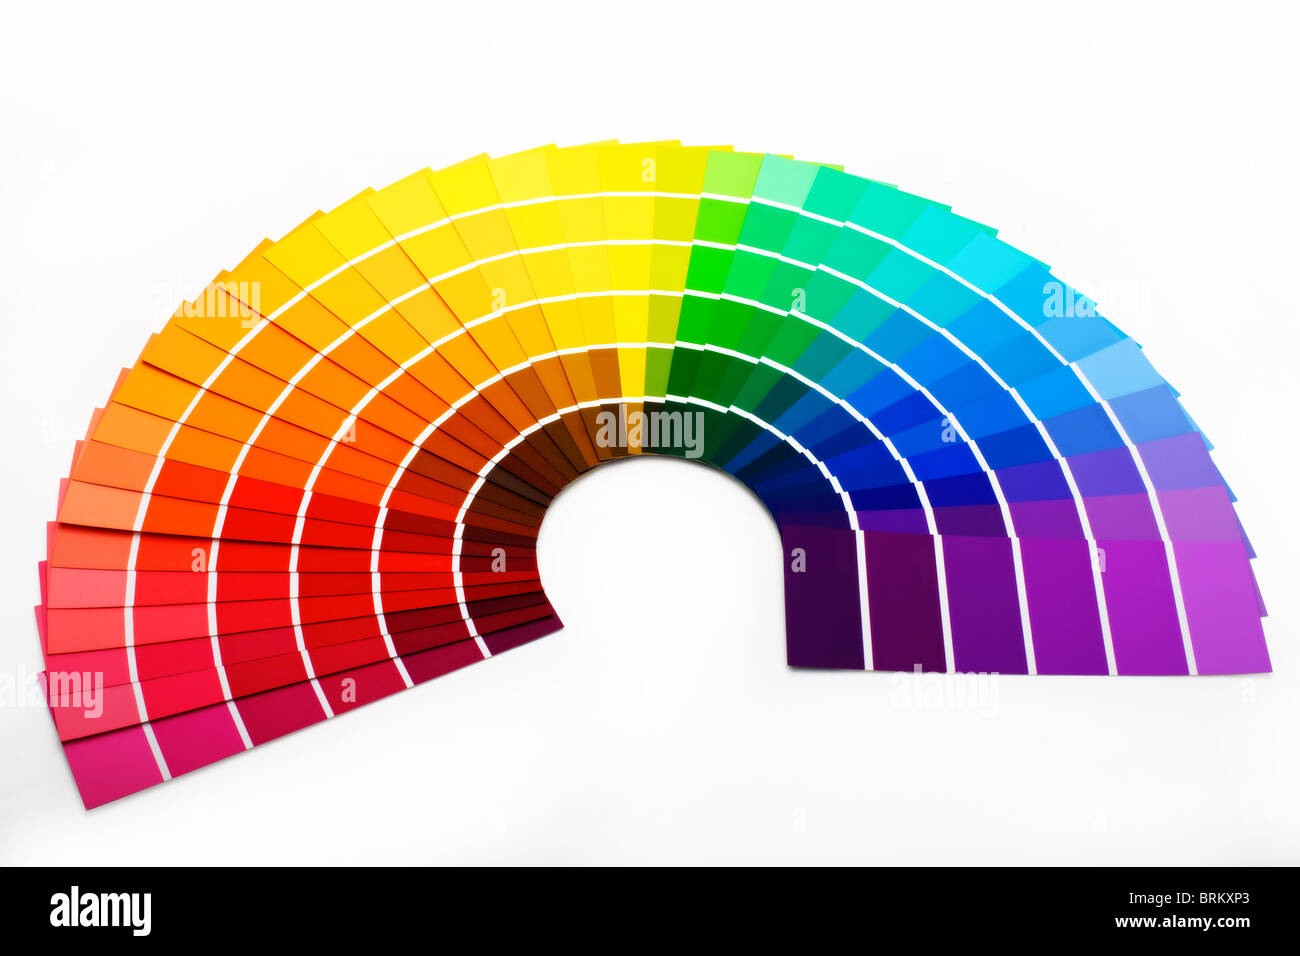 A fan of paint colour swatches Stock Photo